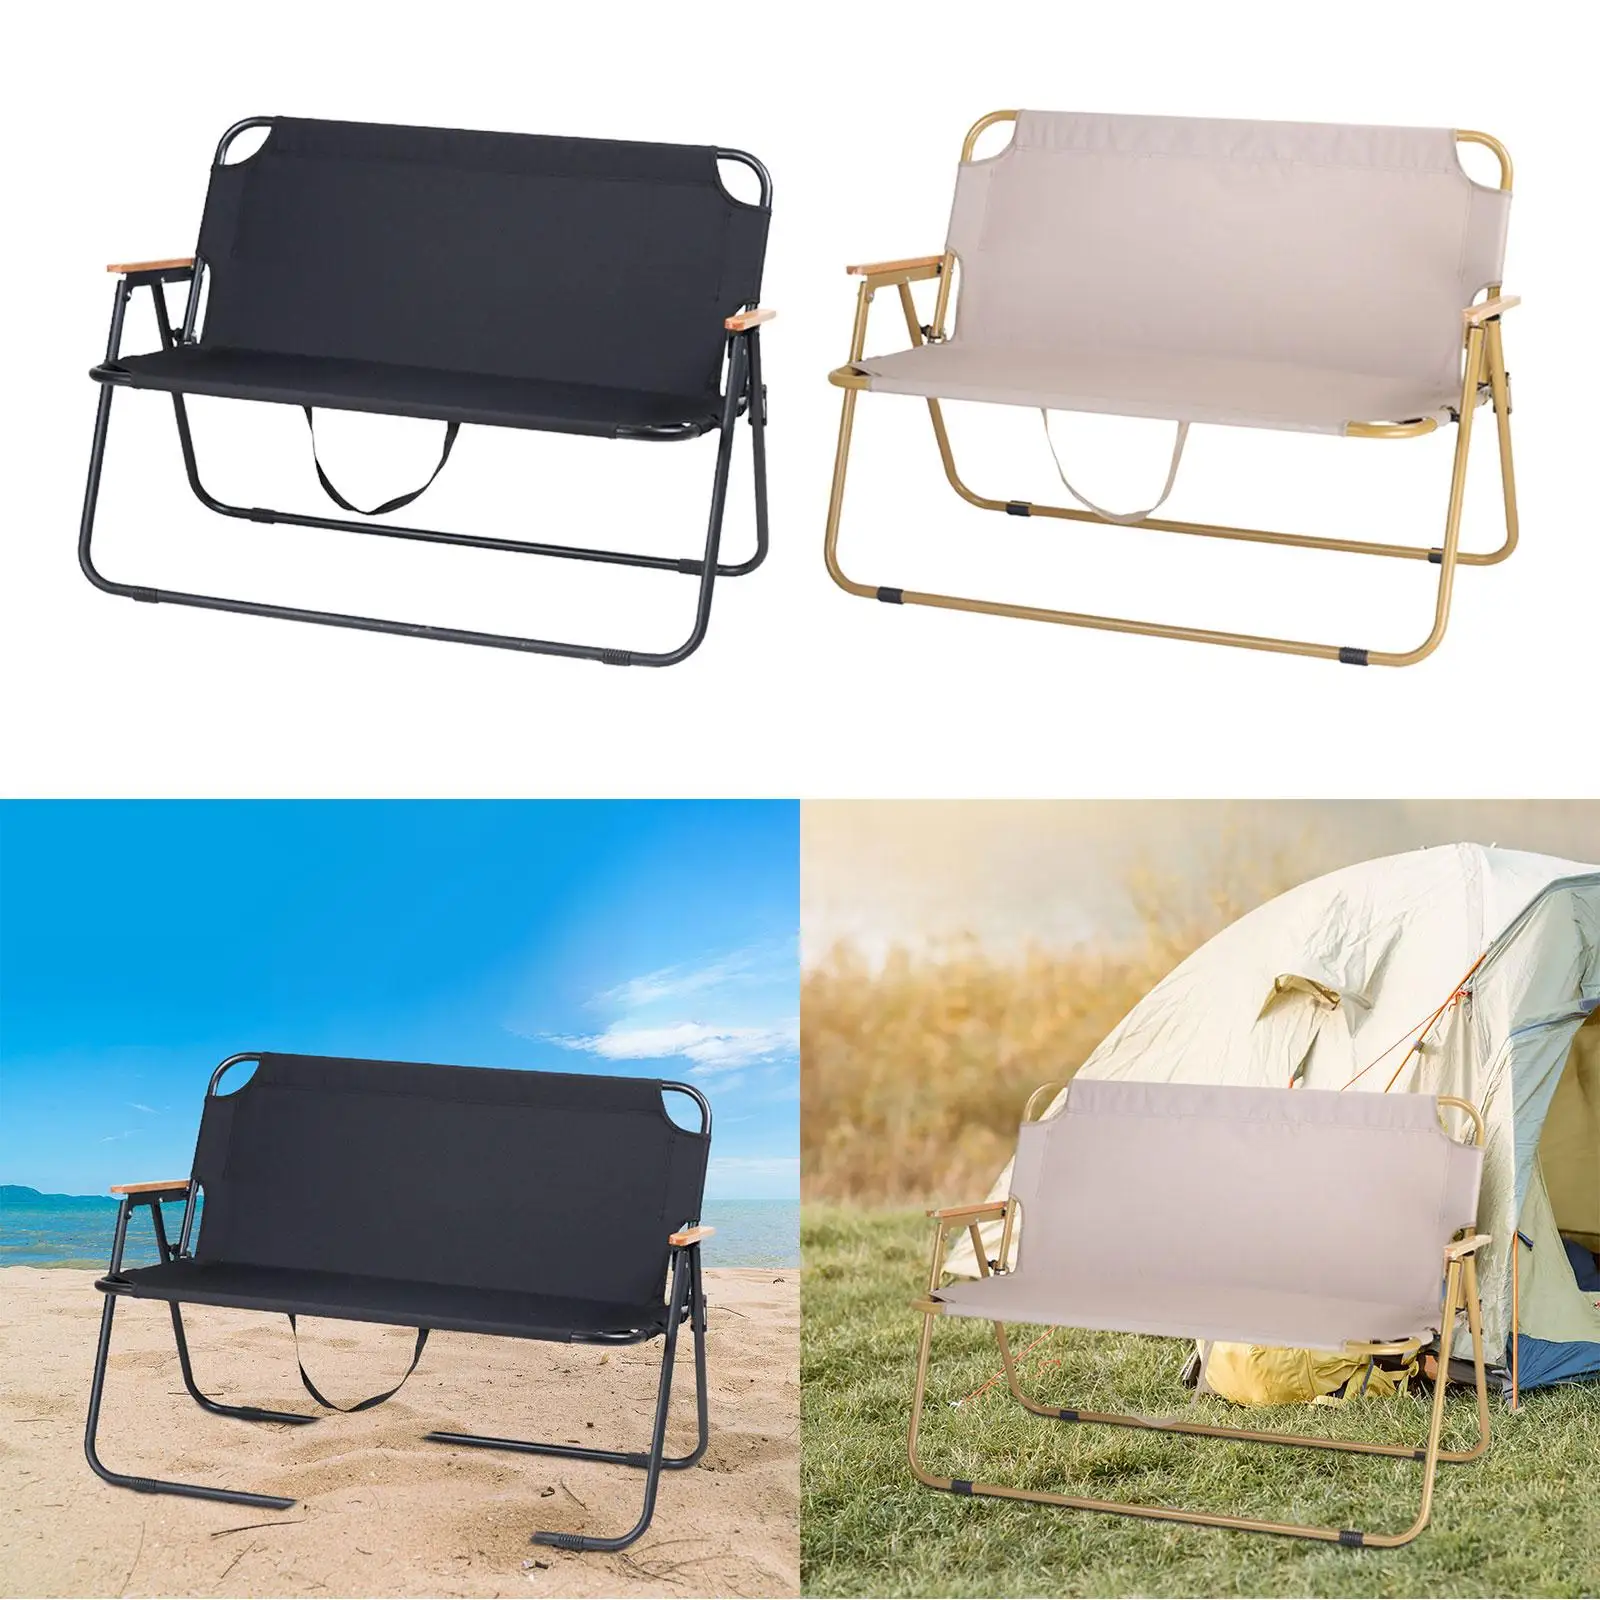 Folding Camping Chair Backpacking Travel Picnic Lightweight Double Chair Fishing Camping Stool Chair Patio Camping Seat Armchair